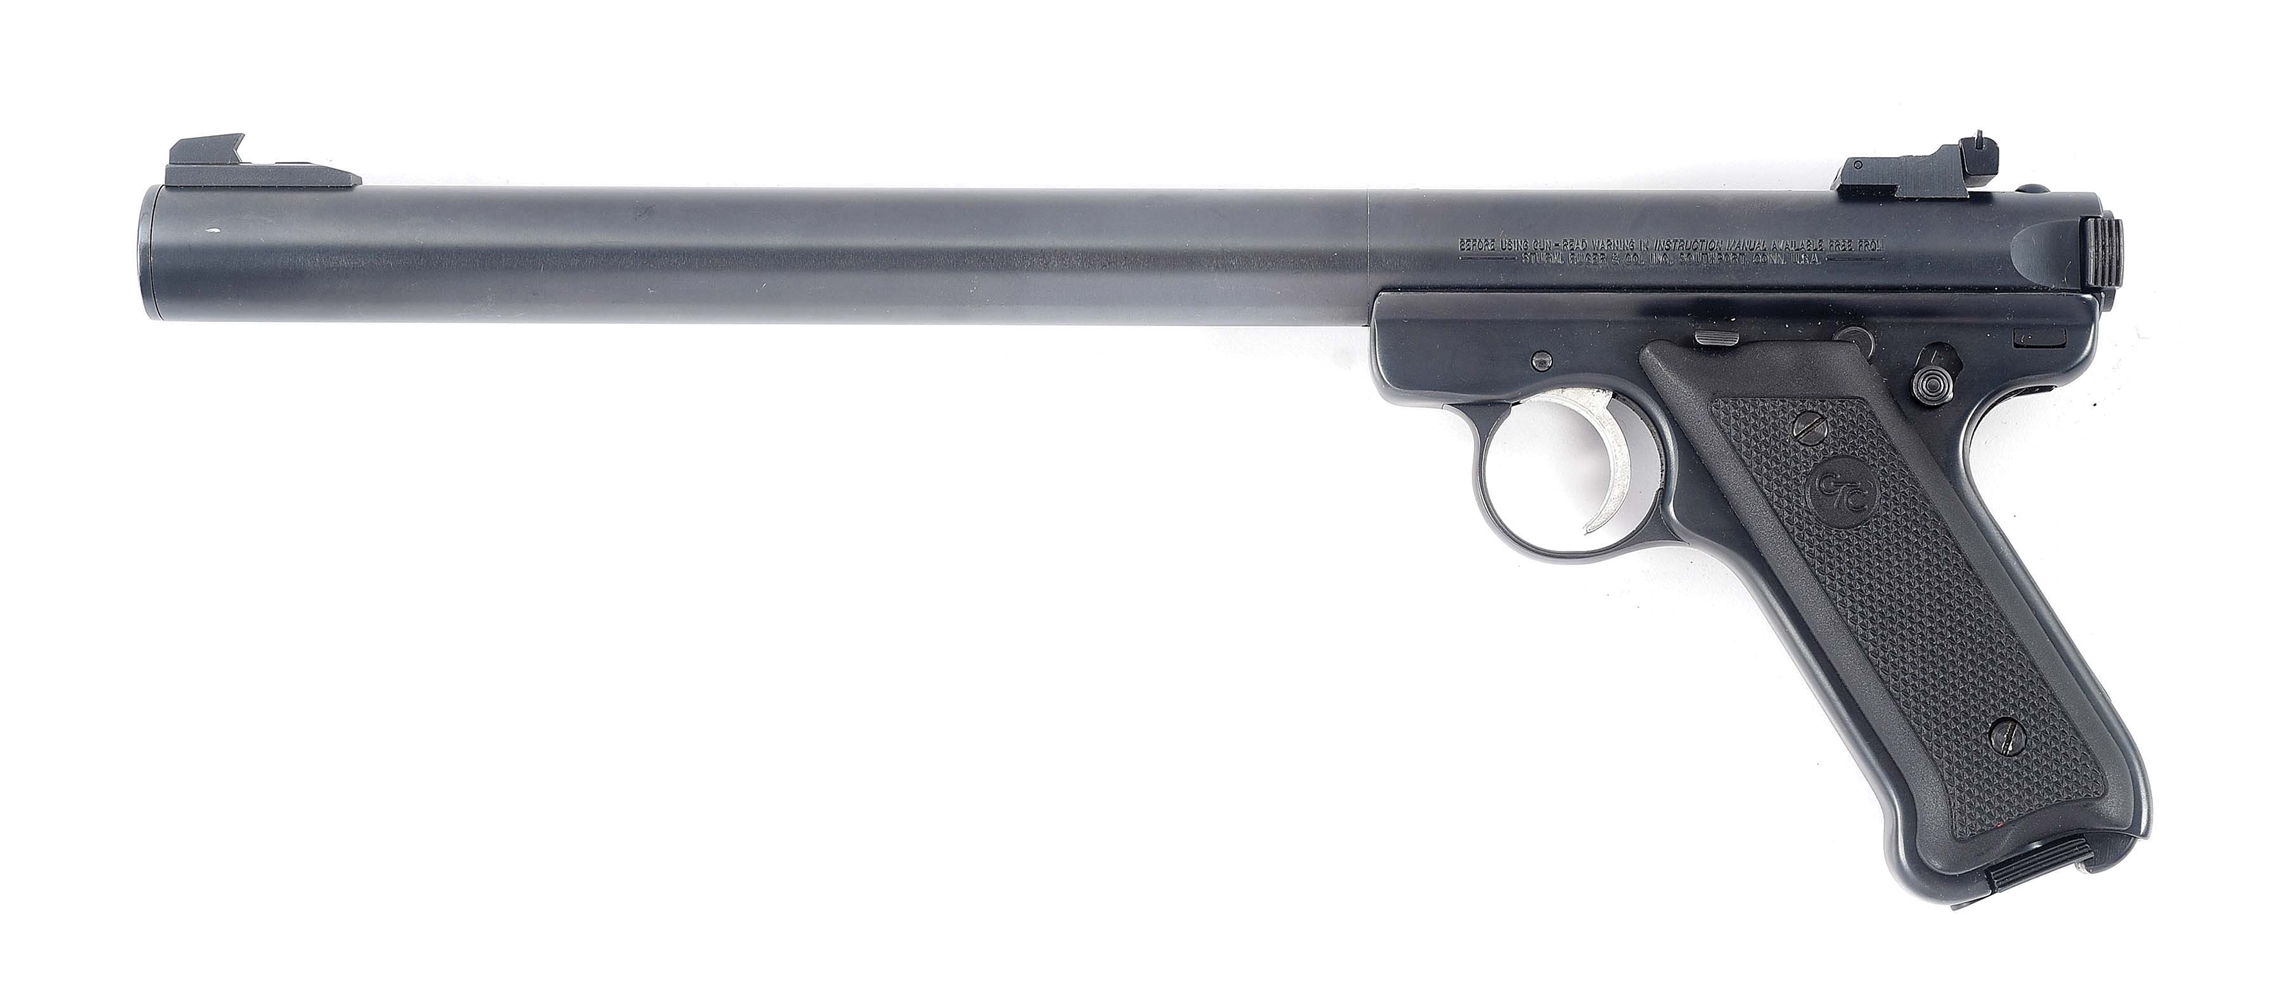 (N) ALWAYS DESIRABLE RUGER MK II SEMI-AUTOMATIC PISTOL WITH INTEGRAL S&H ARMS SILENCER (SILENCER).